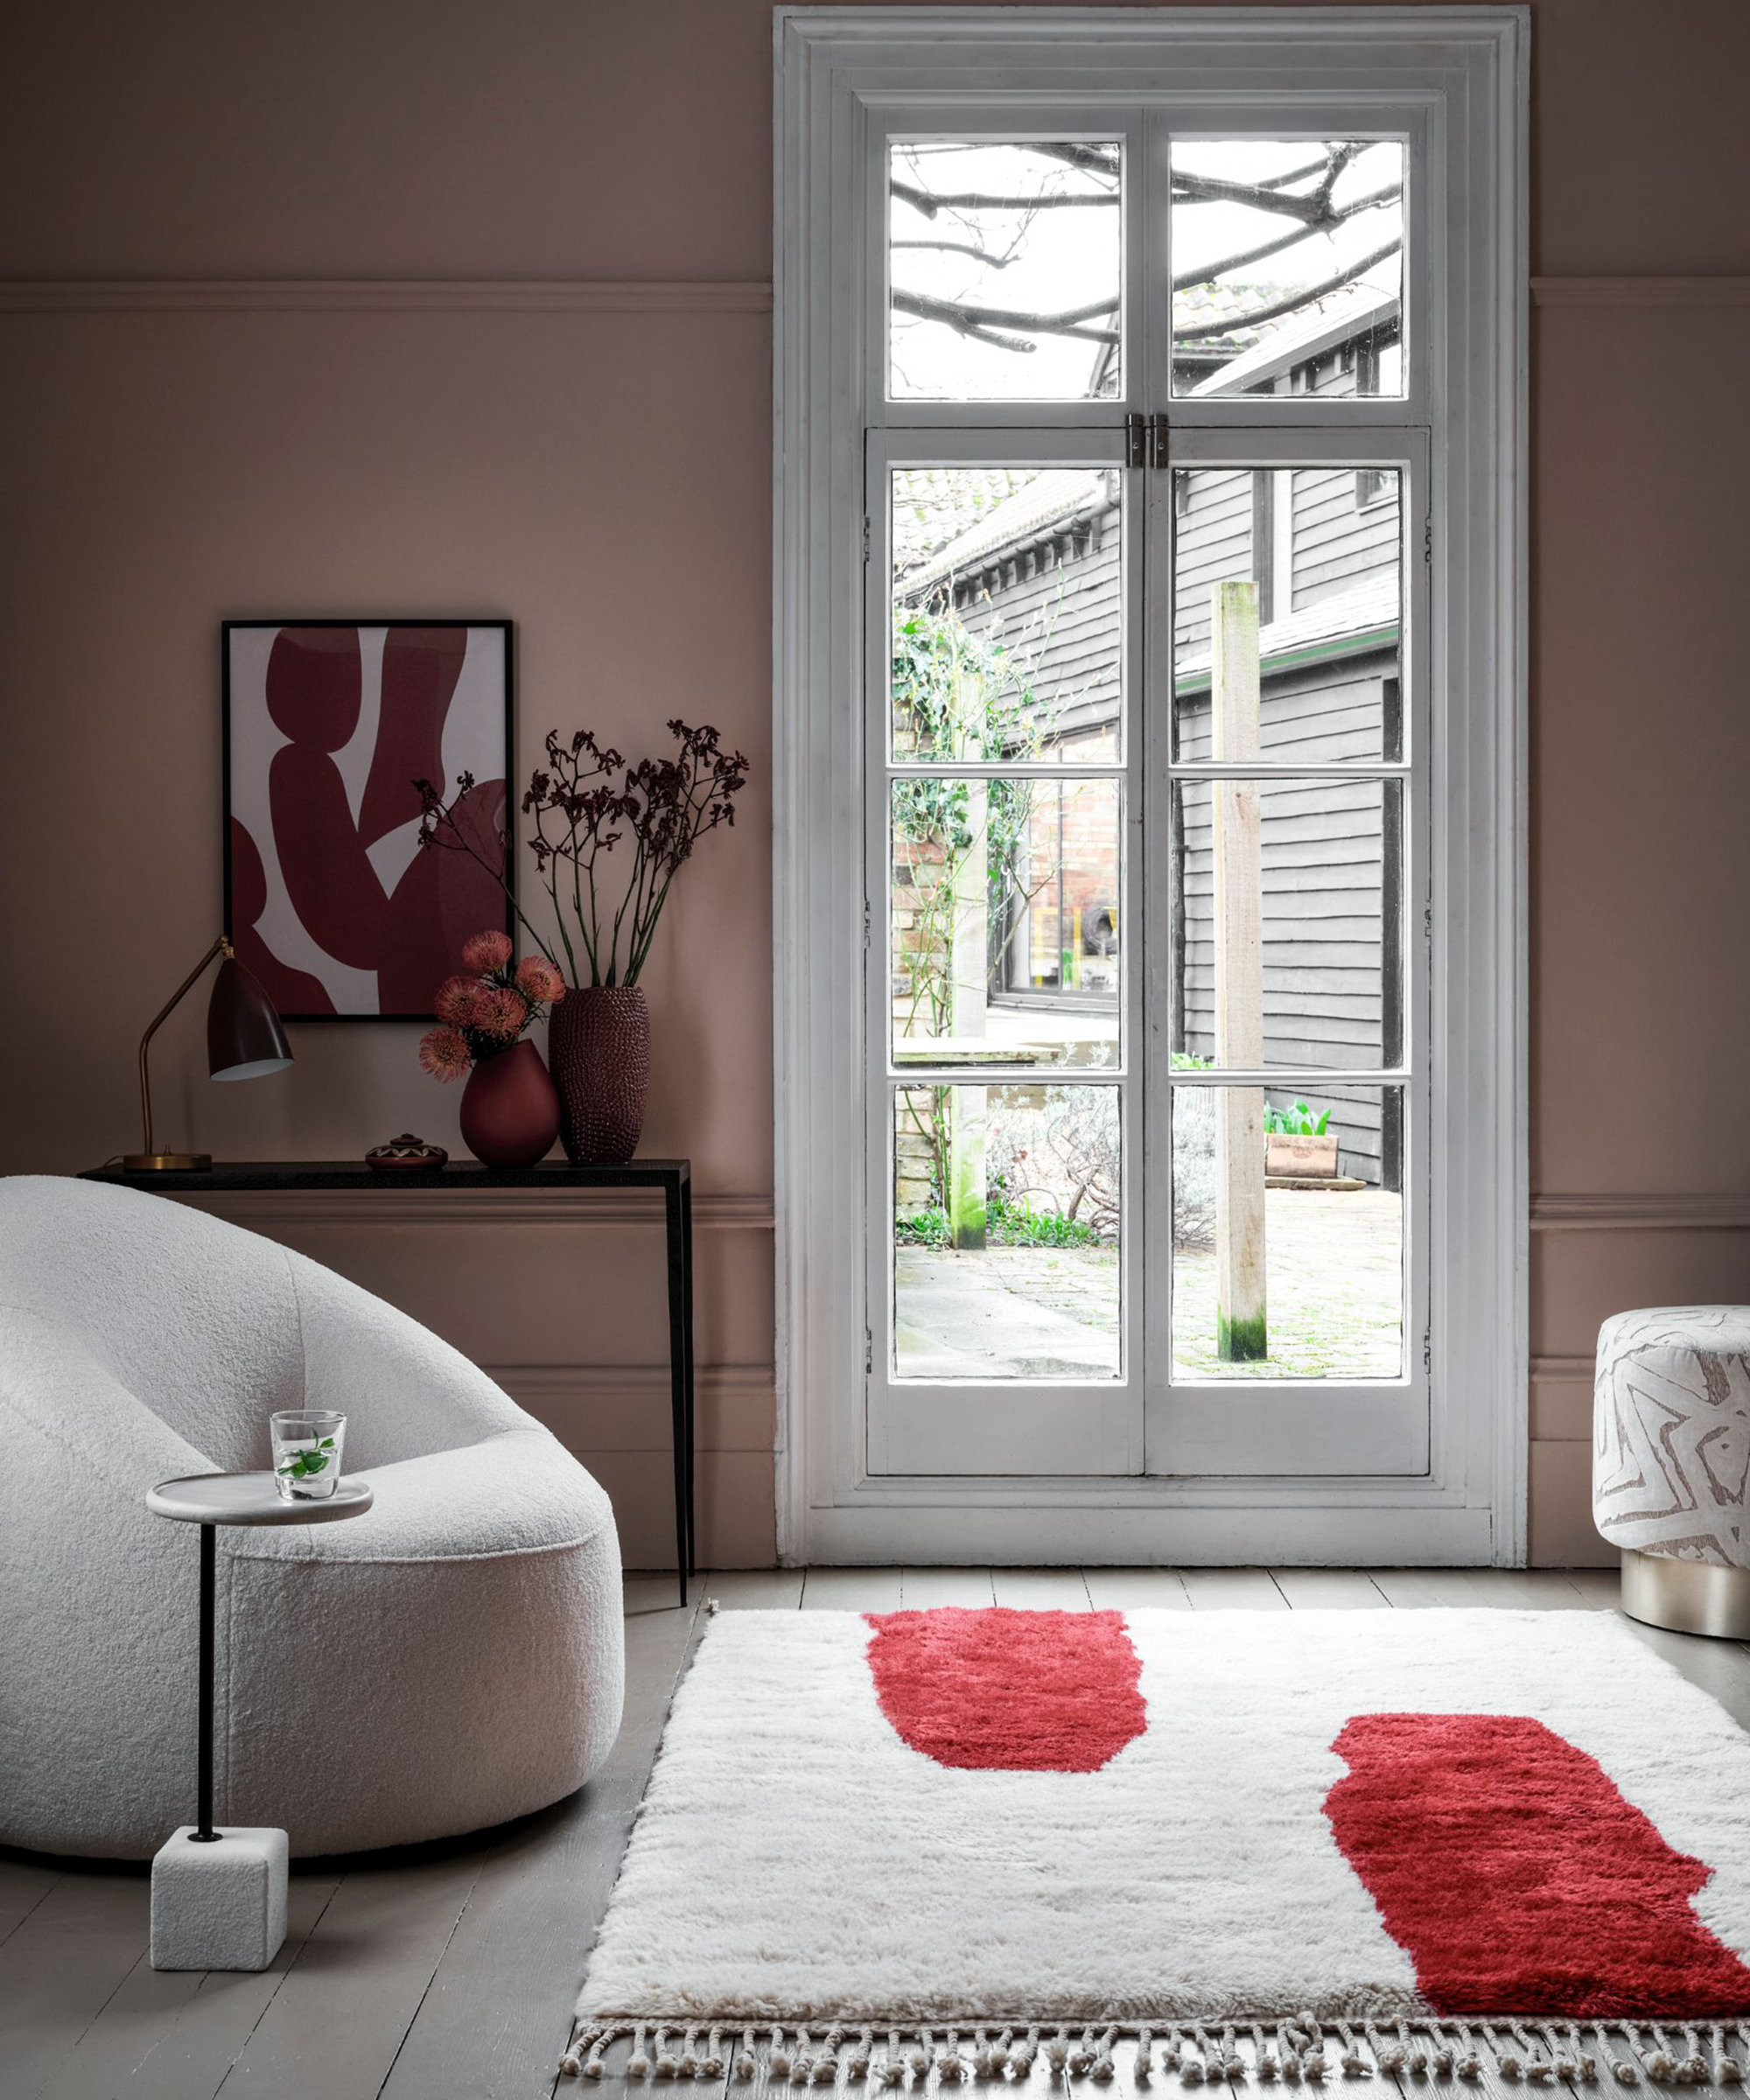 A modern living room idea by Cosy Coco with abstract wall art, dusty pink walls and patterned rug